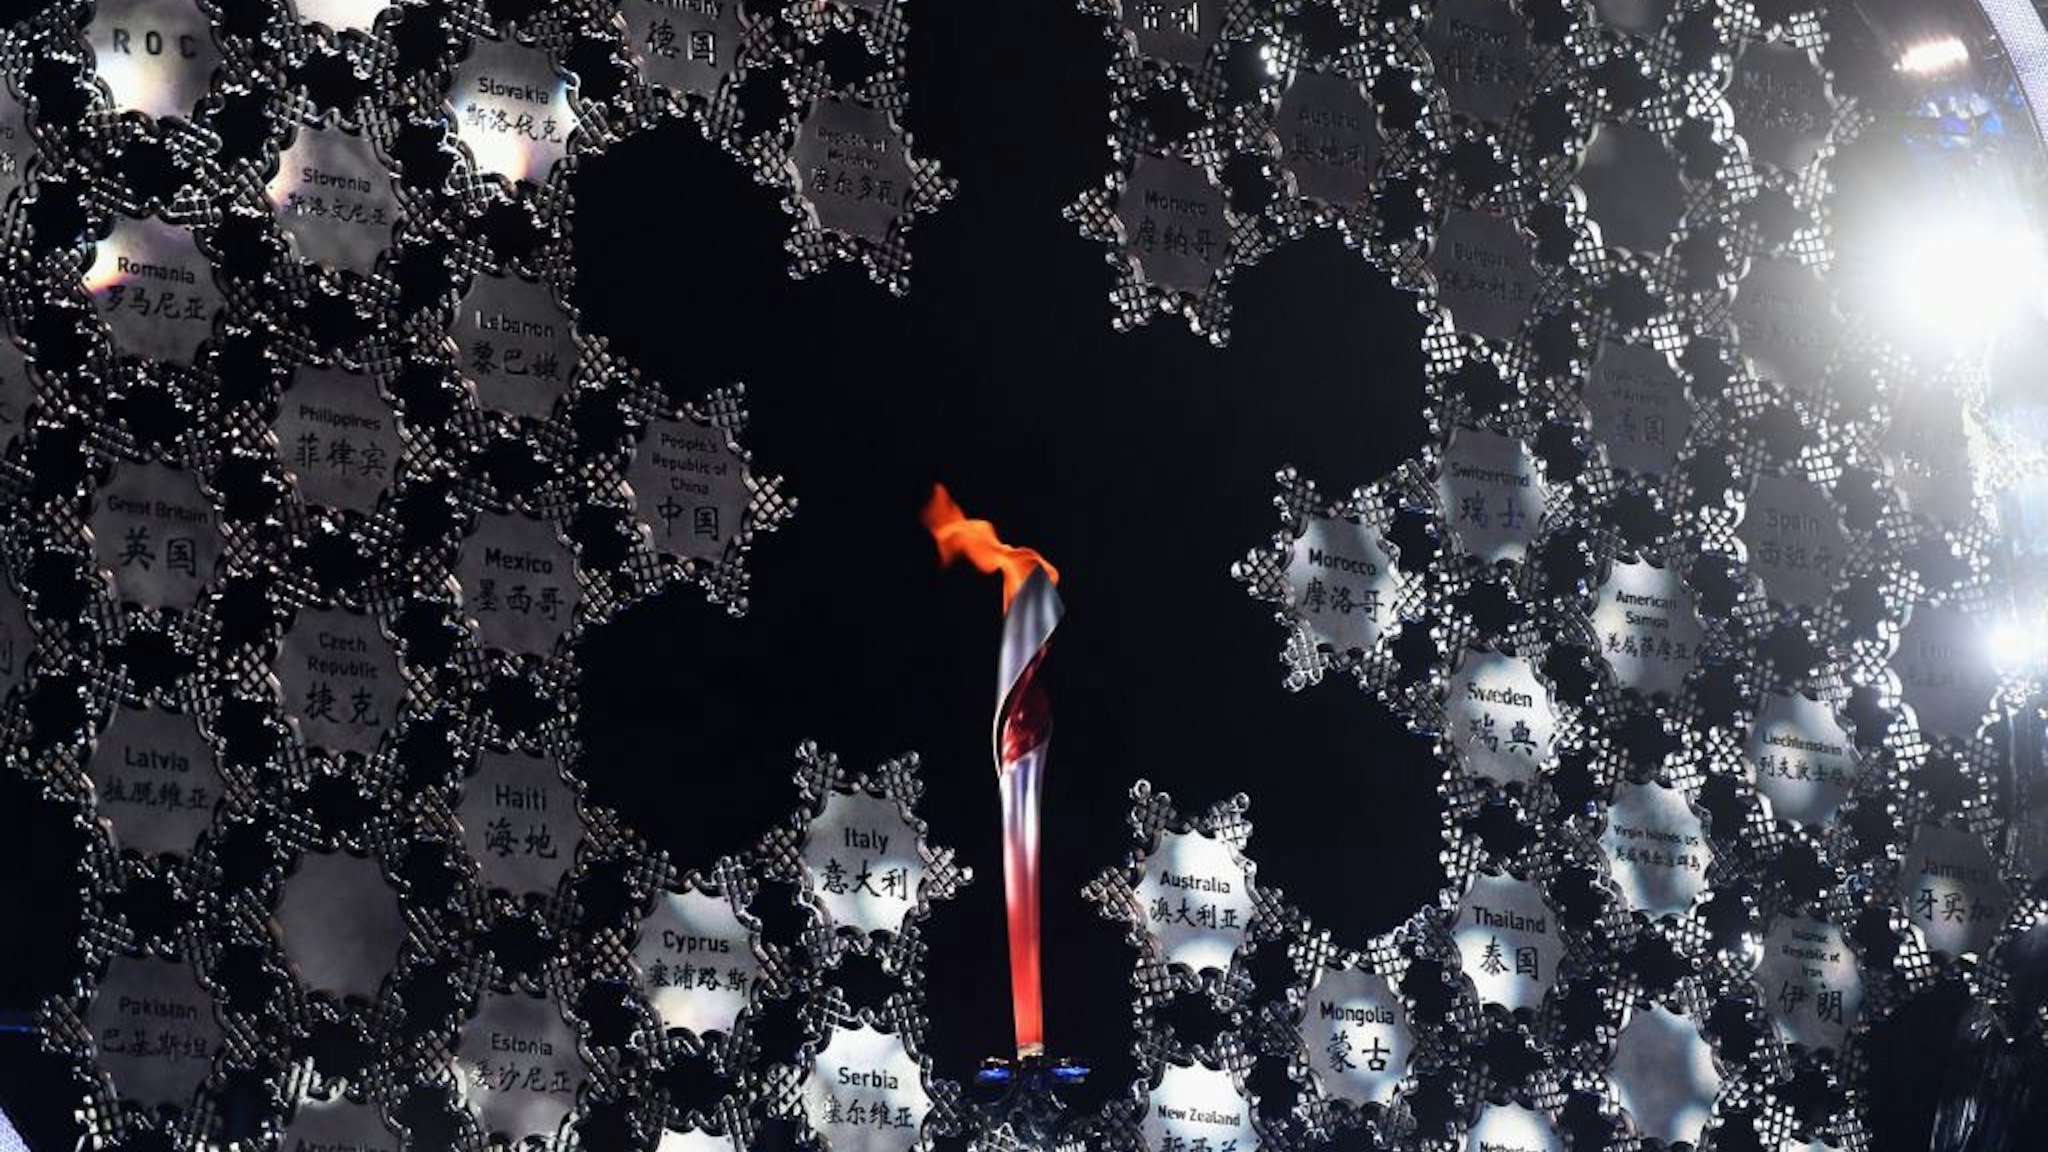 Picture of the Olympic cauldron in Zhangjiakou, China's Hebei Province, after being lit by torch bearer Wang Wenzhuo after the opening ceremony of the Beijing 2022 Winter Olympic Games in Beijing, on February 4, 2022. (Photo by Zhu Xudong / various sources / AFP) (Photo by ZHU XUDONG/AFP via Getty Images)